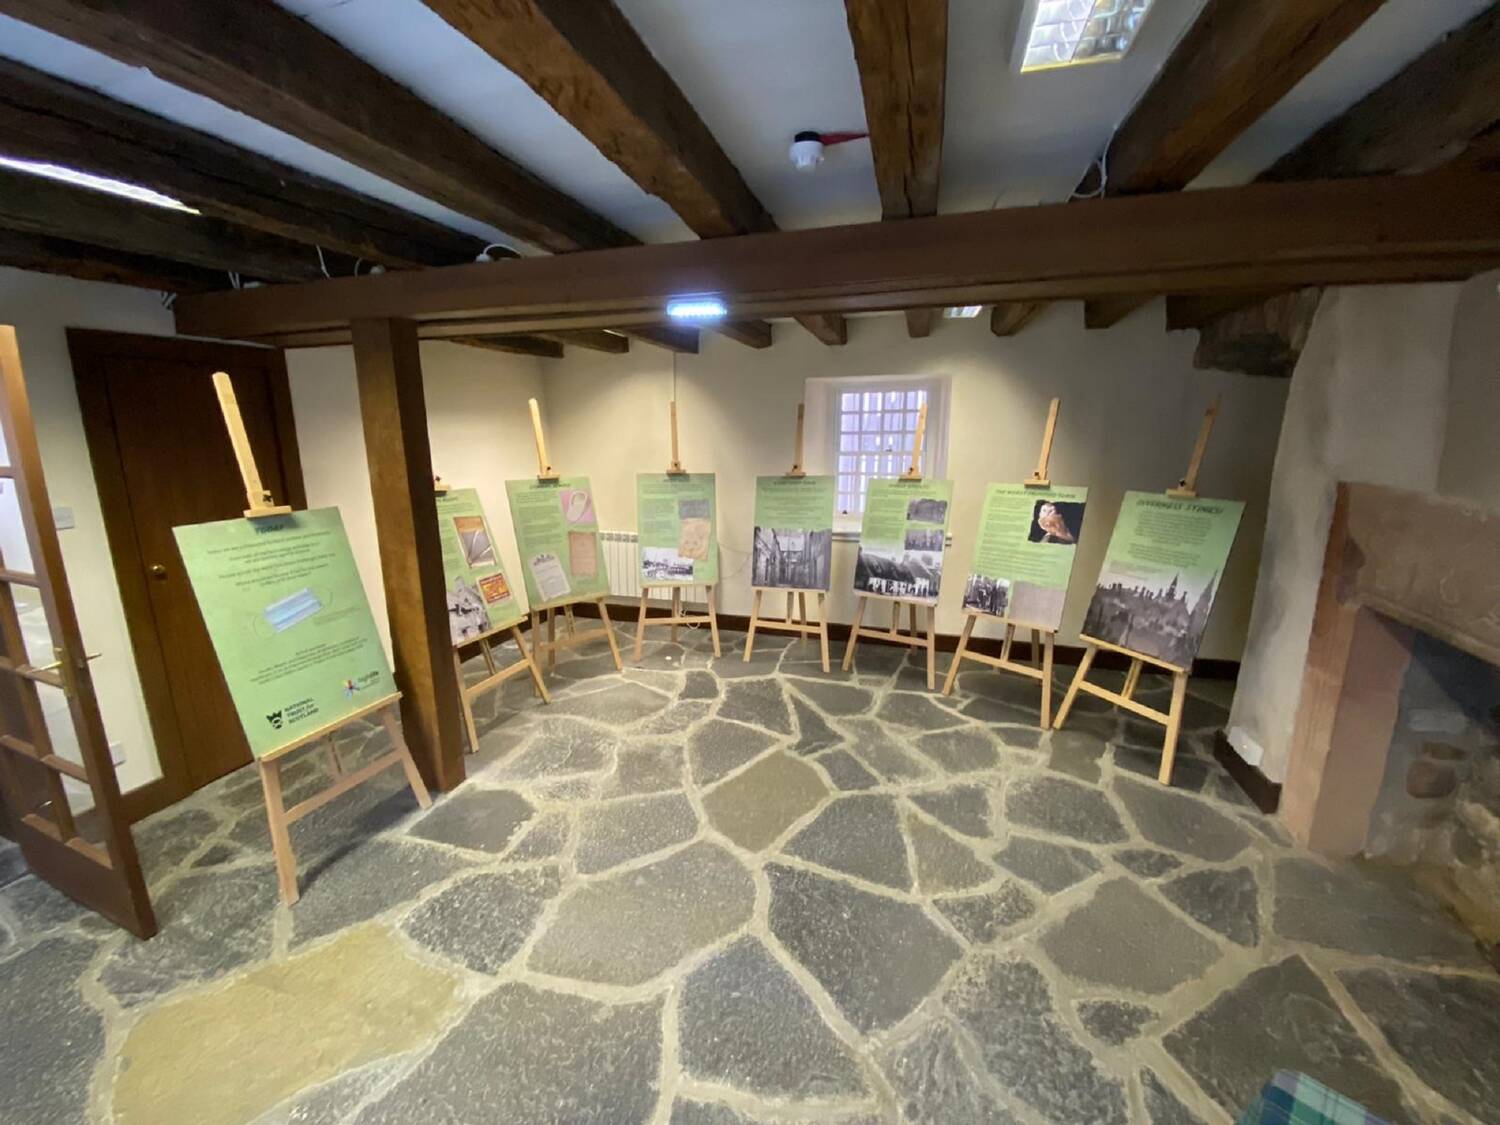 A room in an old house with a flagstone floor and exposed timber beams in the ceiling has an exhibition on display. The exhibition is shown on various panels mounted on wooden easels around the edge of the room.